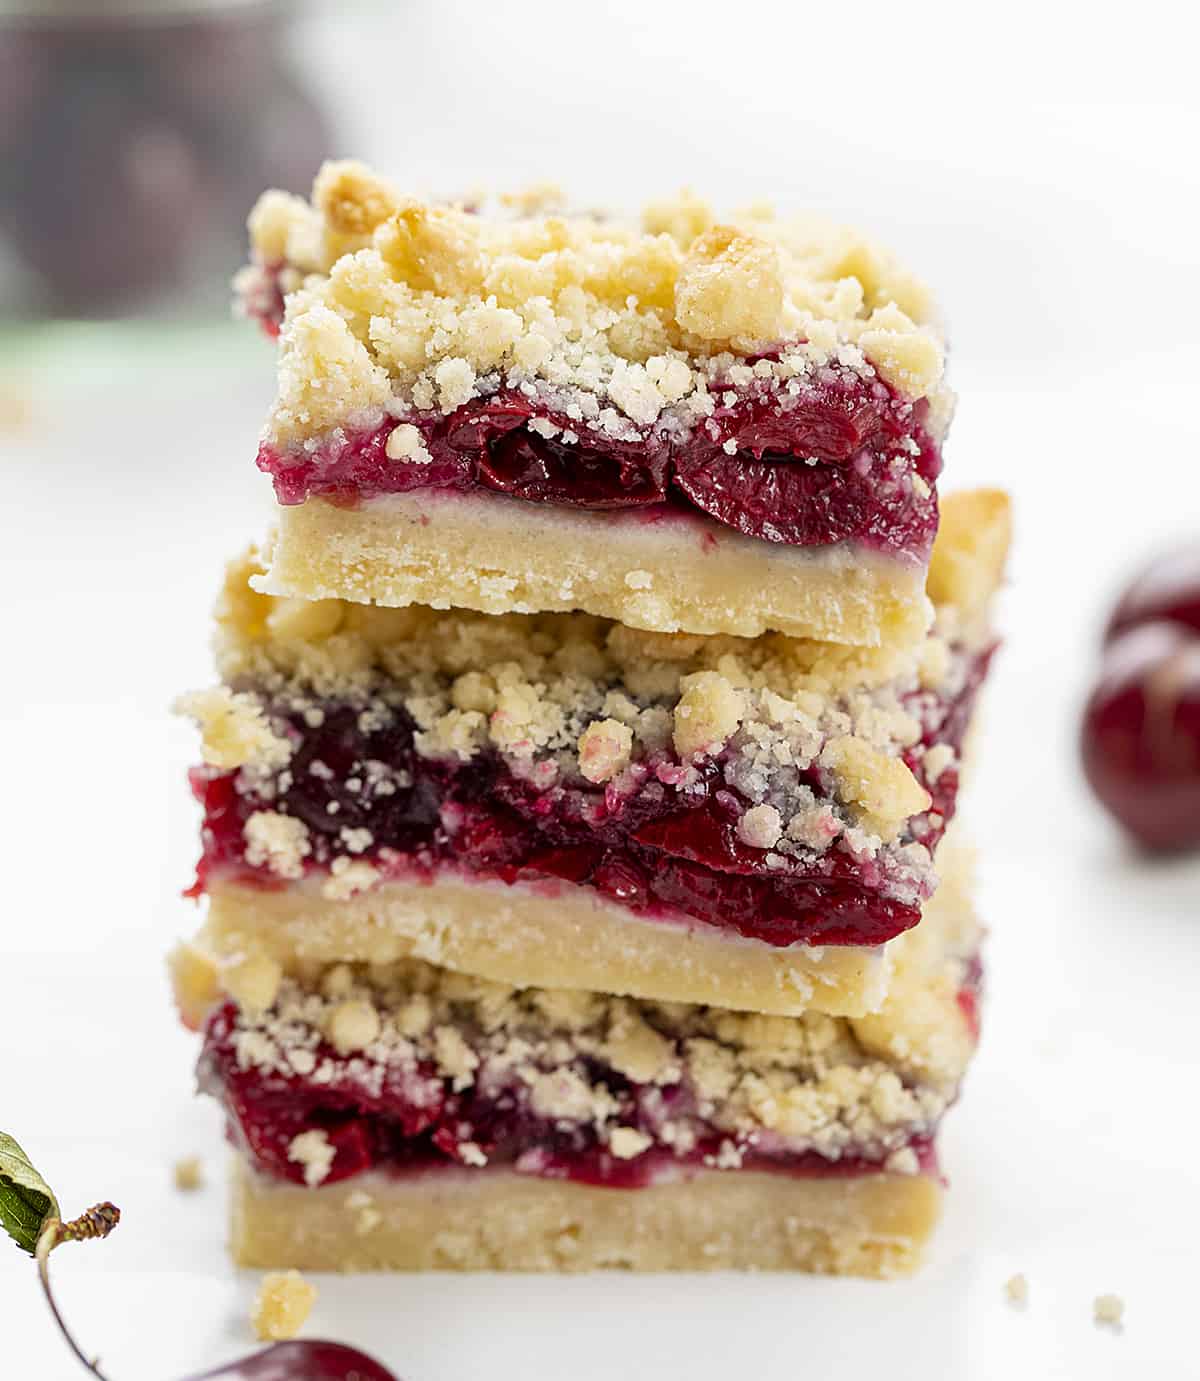 Stack of Cherry Pie Bars with Real Cherries Around. Dessert, Baking, Bars, Cherry Bars, Cherry Pie Bars, Homemade Cherry Pie Filling, Easy Bars, Real Cherry Desserts, Summer Baking, Winter Baking, Christmas Recipes, i am baker, iambaker.